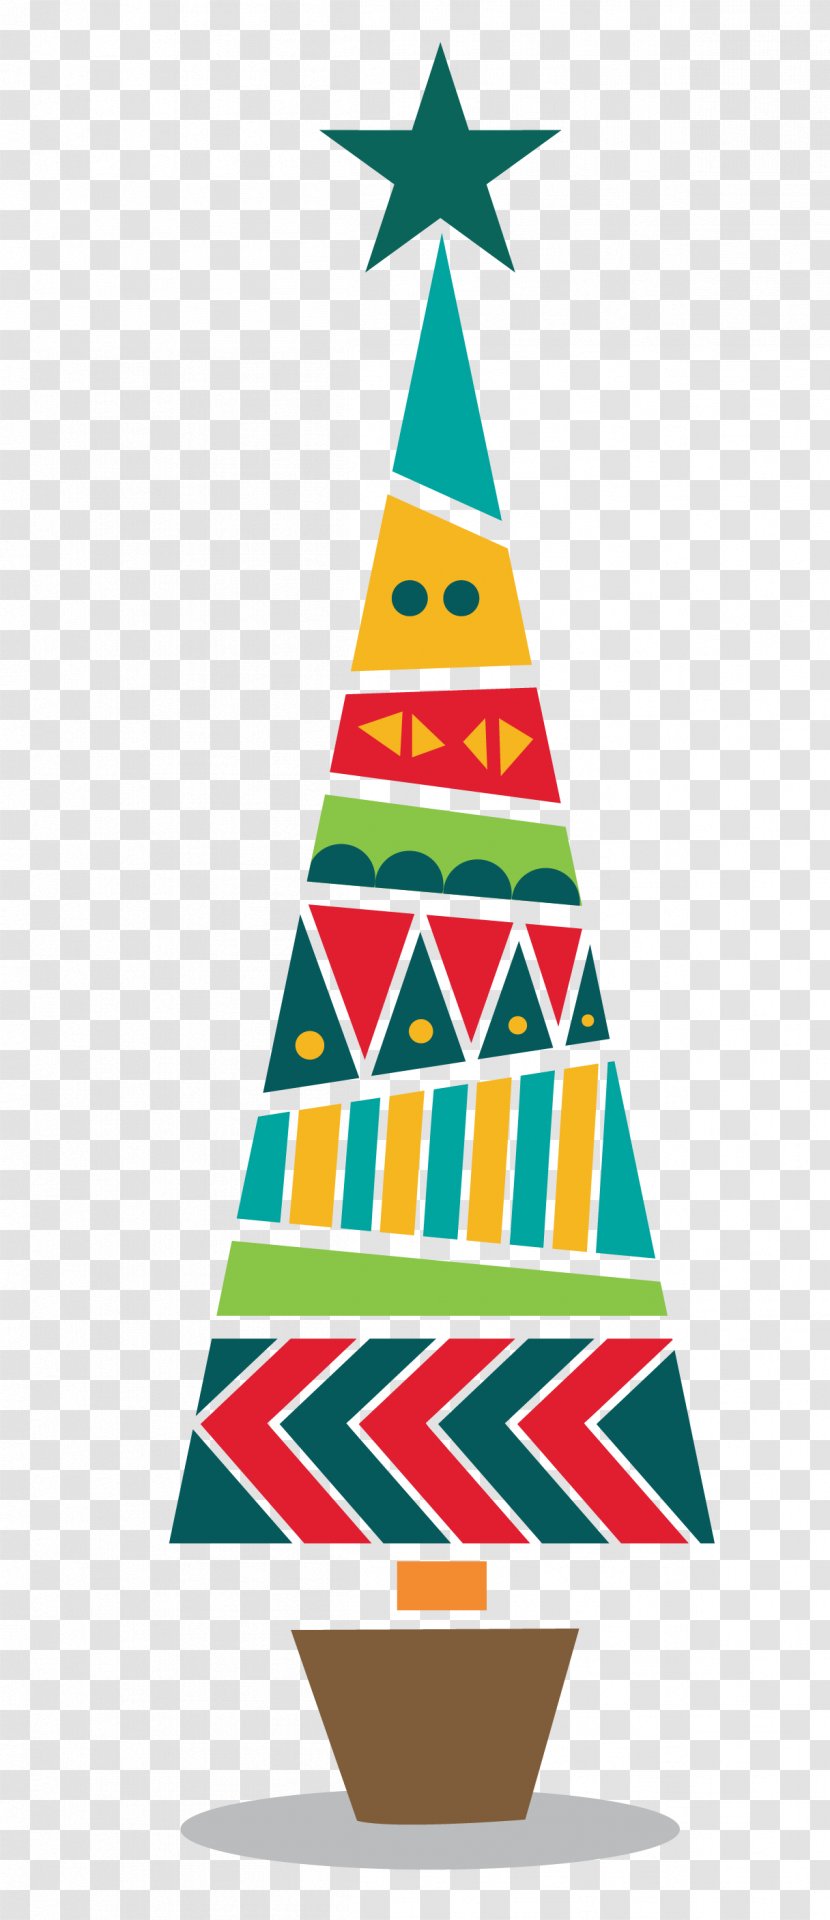 Christmas Tree Card Decoration New Year - Decorations Transparent PNG